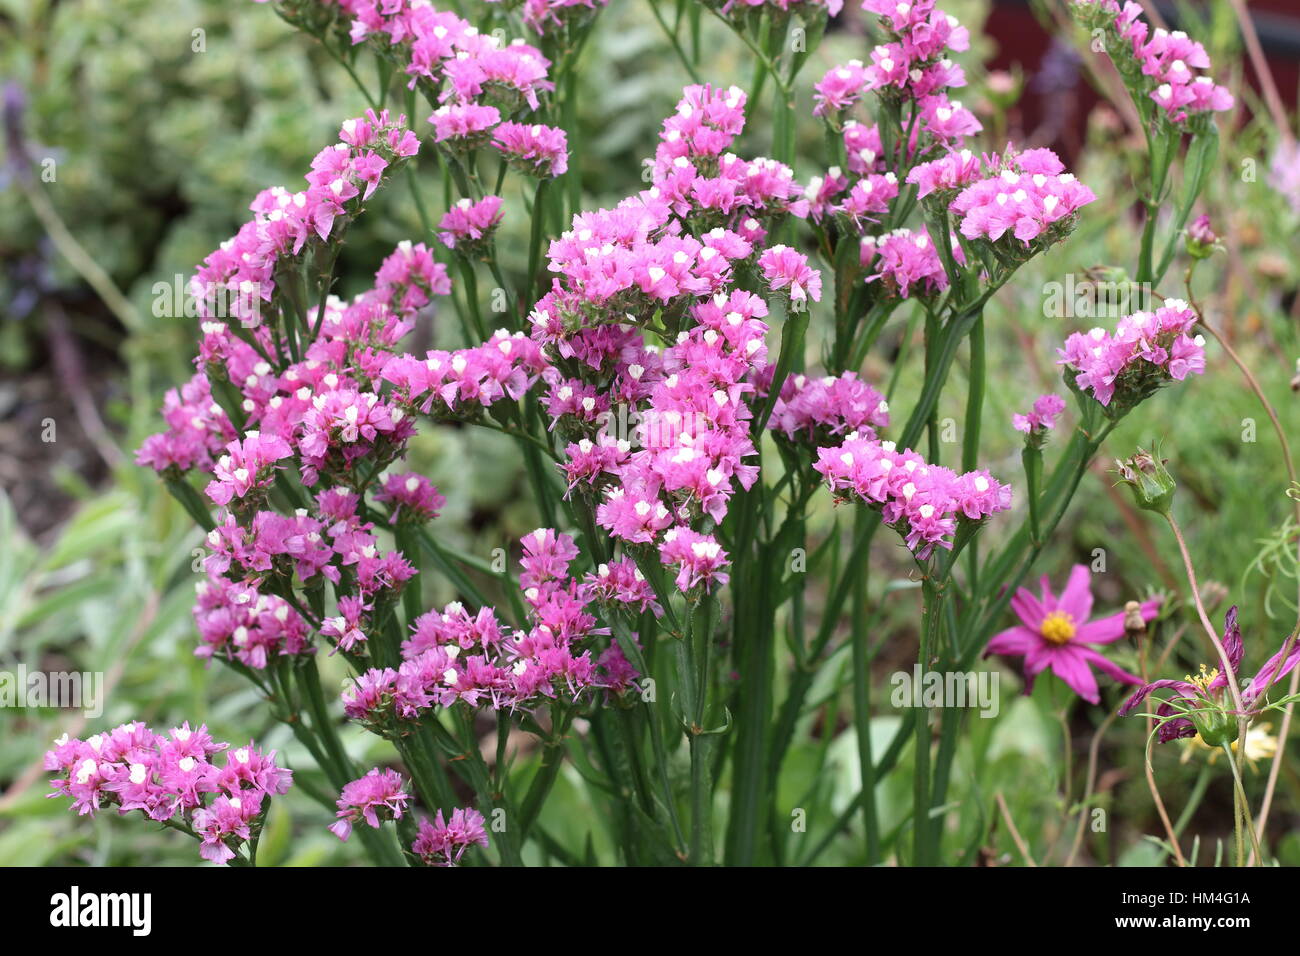 Statice flowers or also known as Limonium sinuatum, sea lavender, notch leaf marsh rosemary, sea pink, wavyleaf lavender Stock Photo